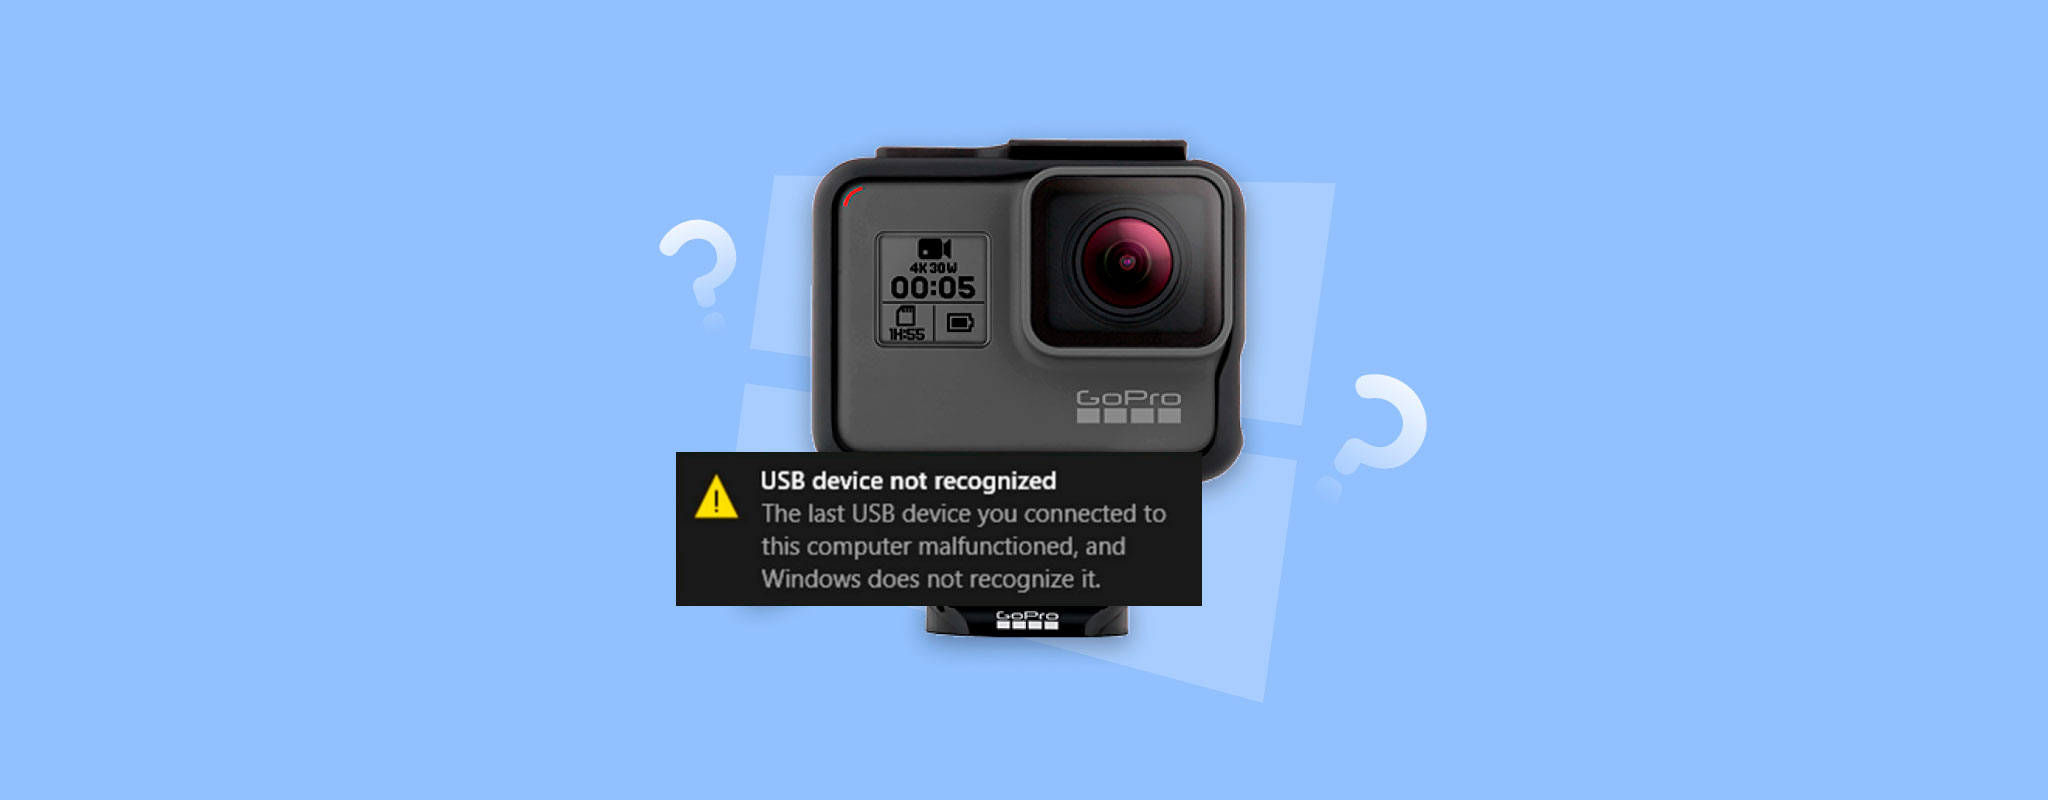 La cabra Billy Mentor Invalidez GoPro Is Not Showing Up on PC: How to Fix and Recover Files